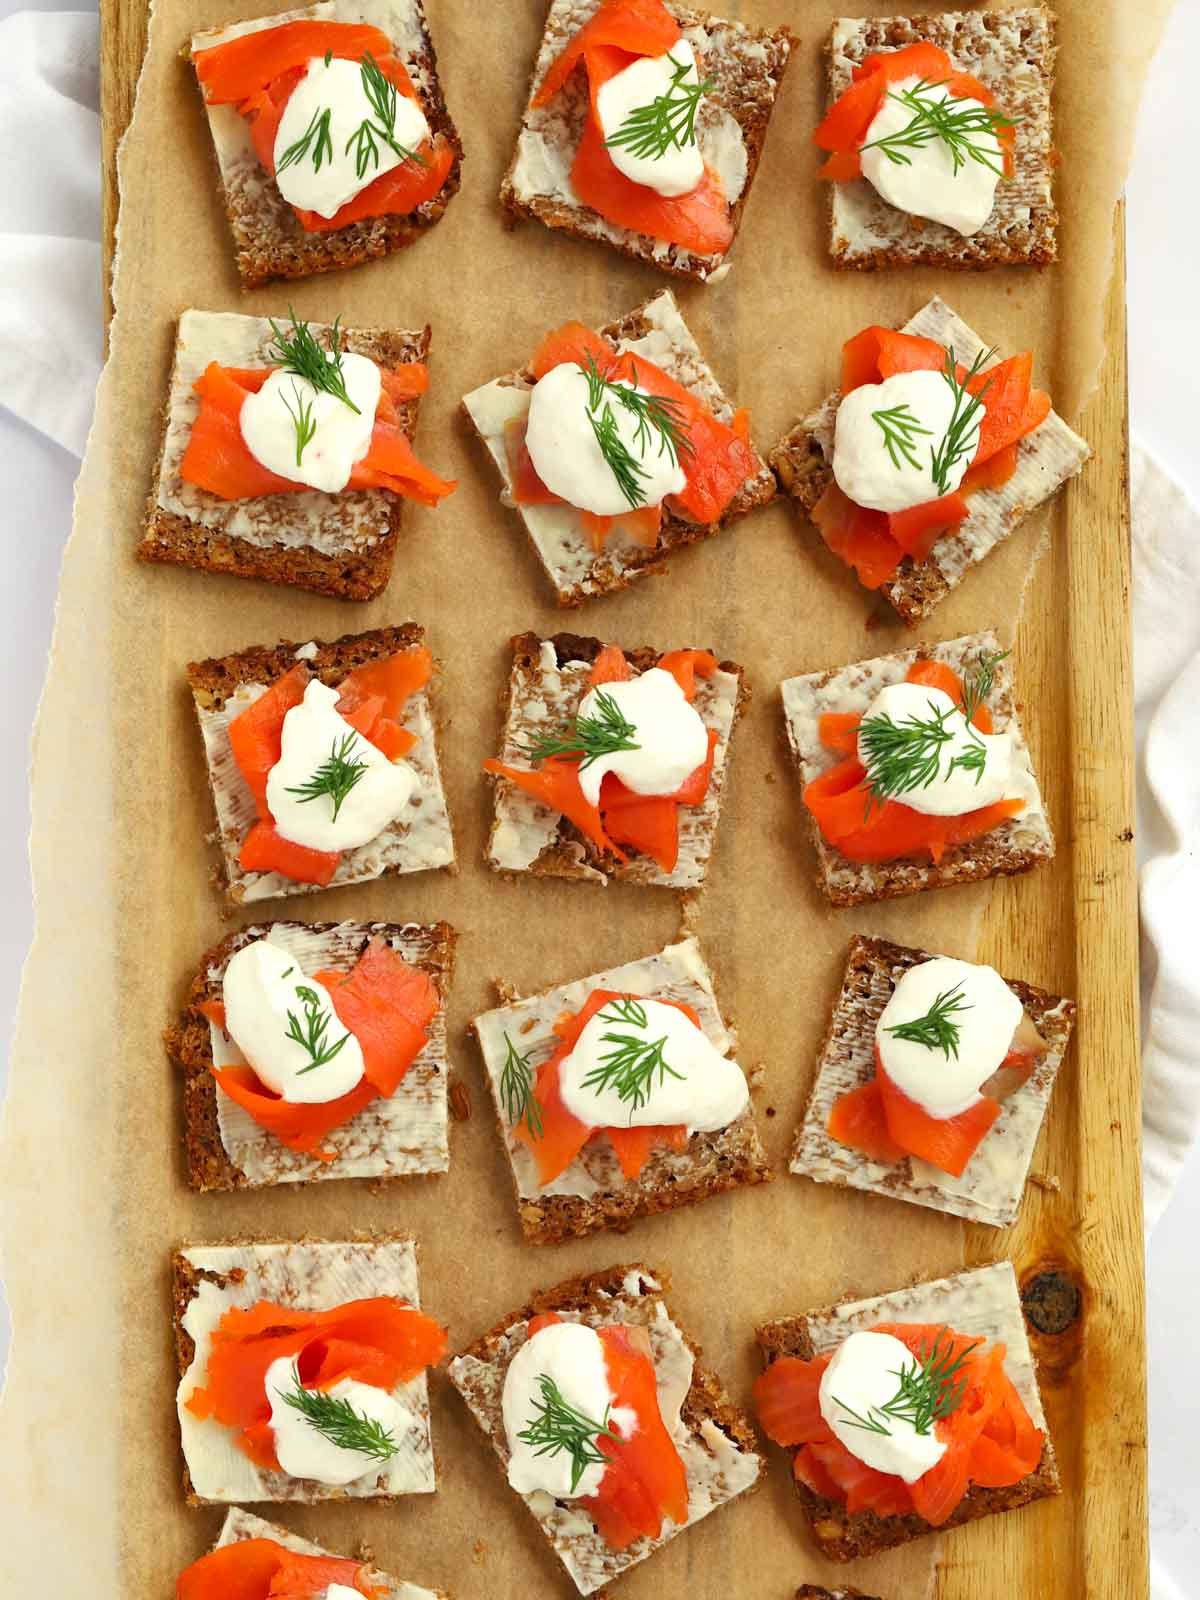 Little squares of smoked salmon on rye bread for a starter or appetiser.